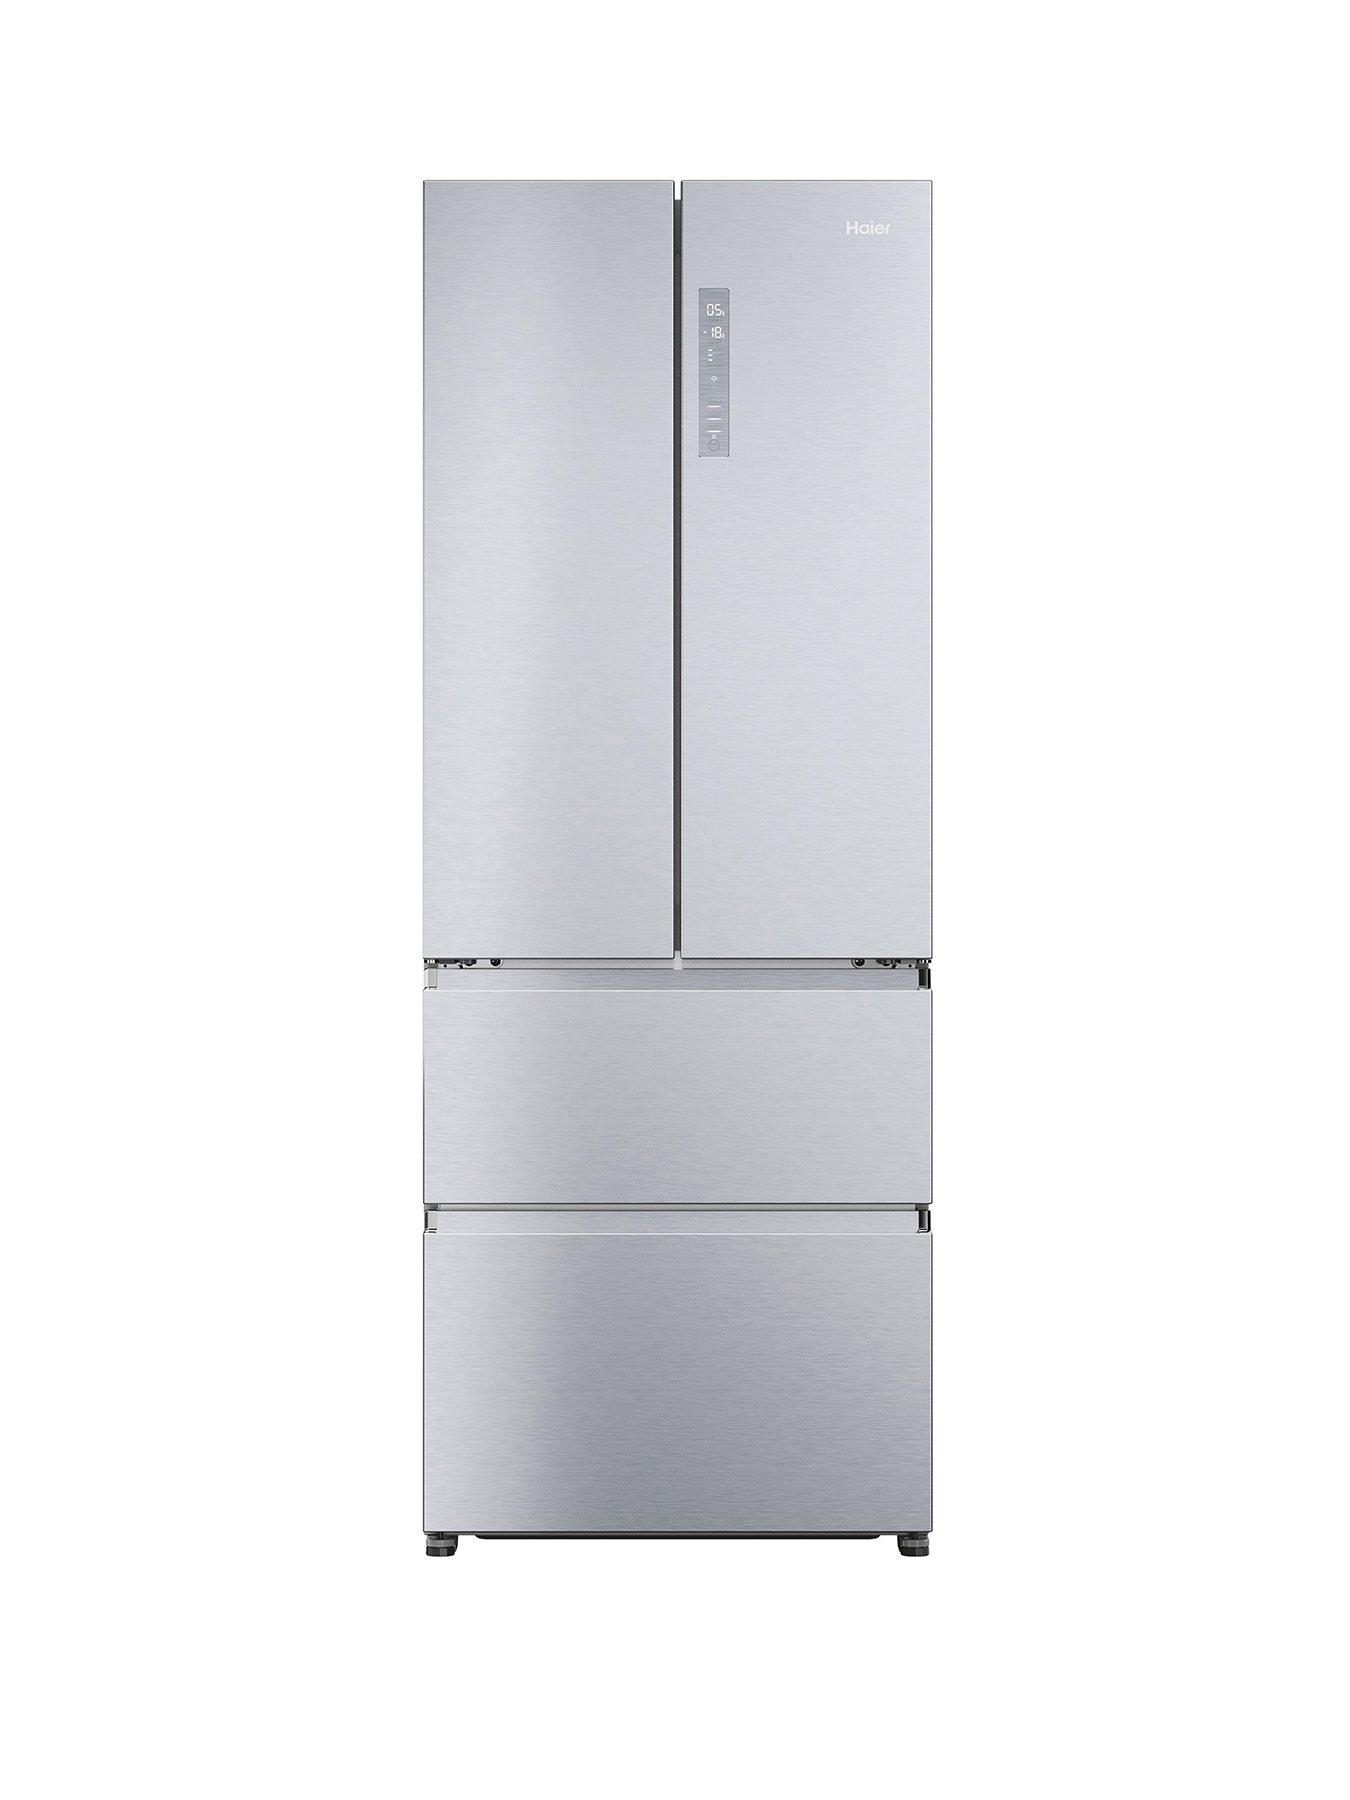 Haier Fd 70 Hfr5719Enmg 70Cm Wide Frost-Free American Fridge Freezer, E Rated - Stainless Steel